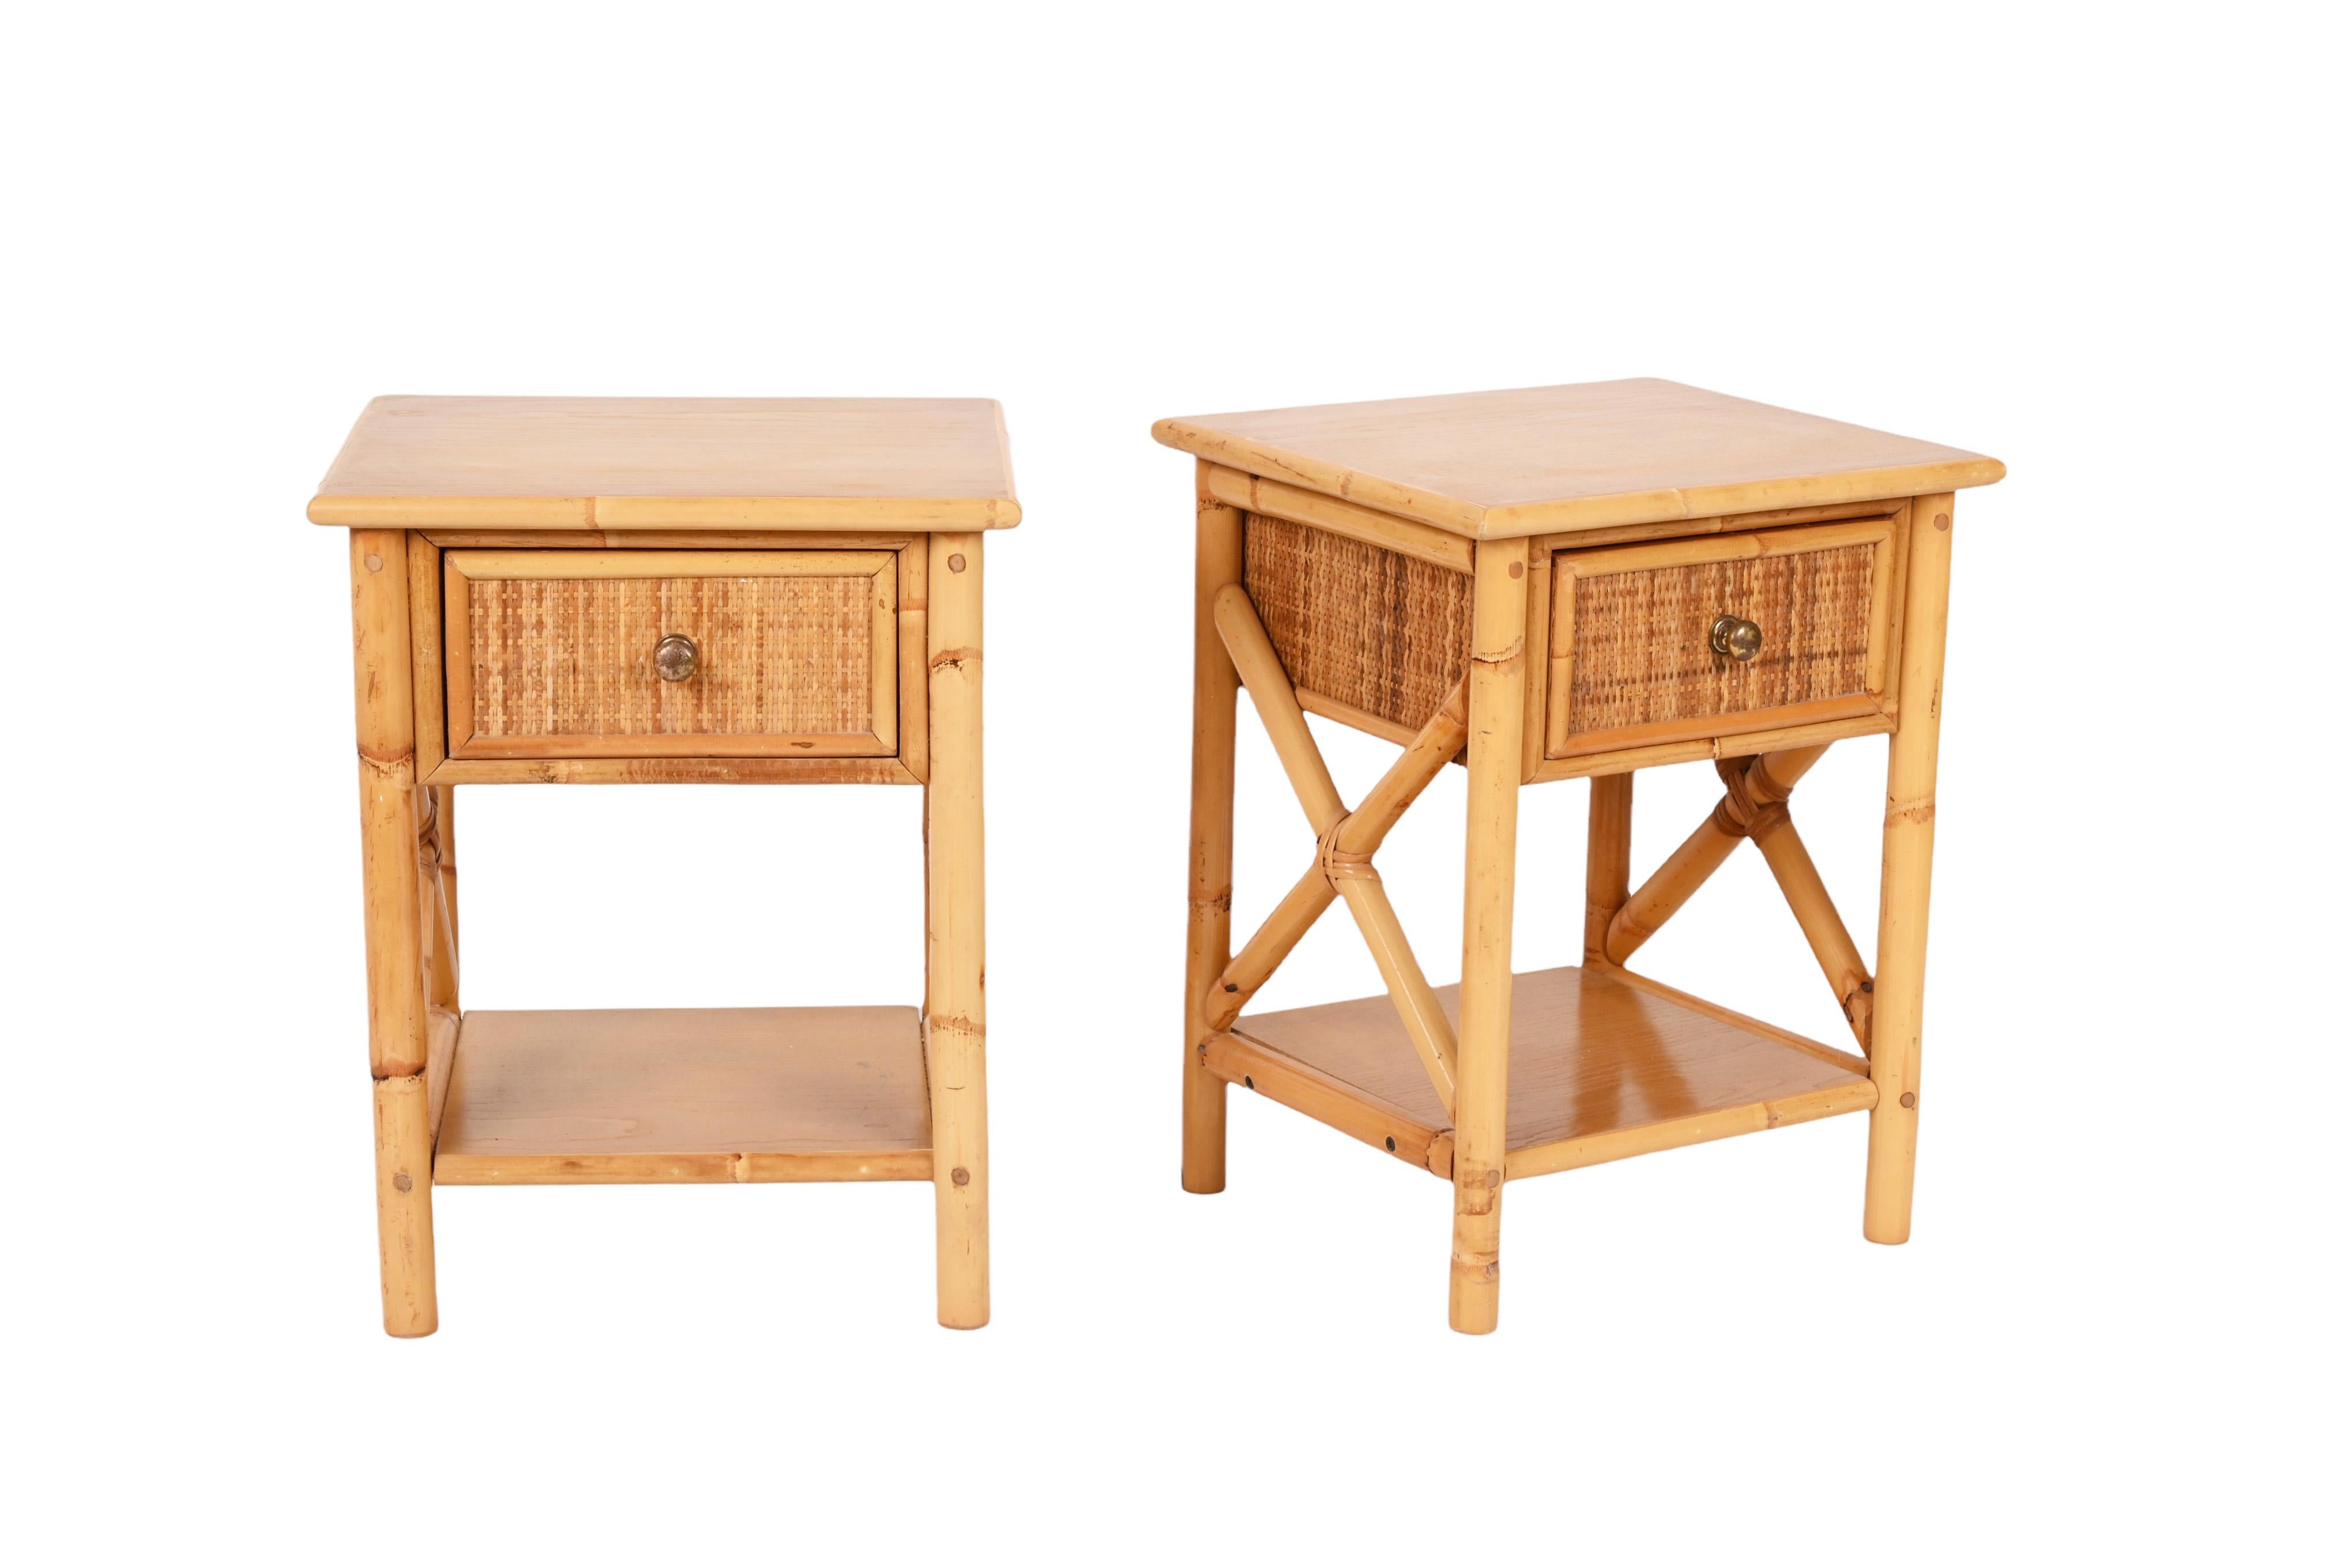 Incredible pair of Mid-Century Modern bamboo and rattan nightstands. These fantastic pieces were designed in Italy in the 1980s.

The main features of this wonderful set are the beautiful rationalist straight lines, enhanced by the use of natural